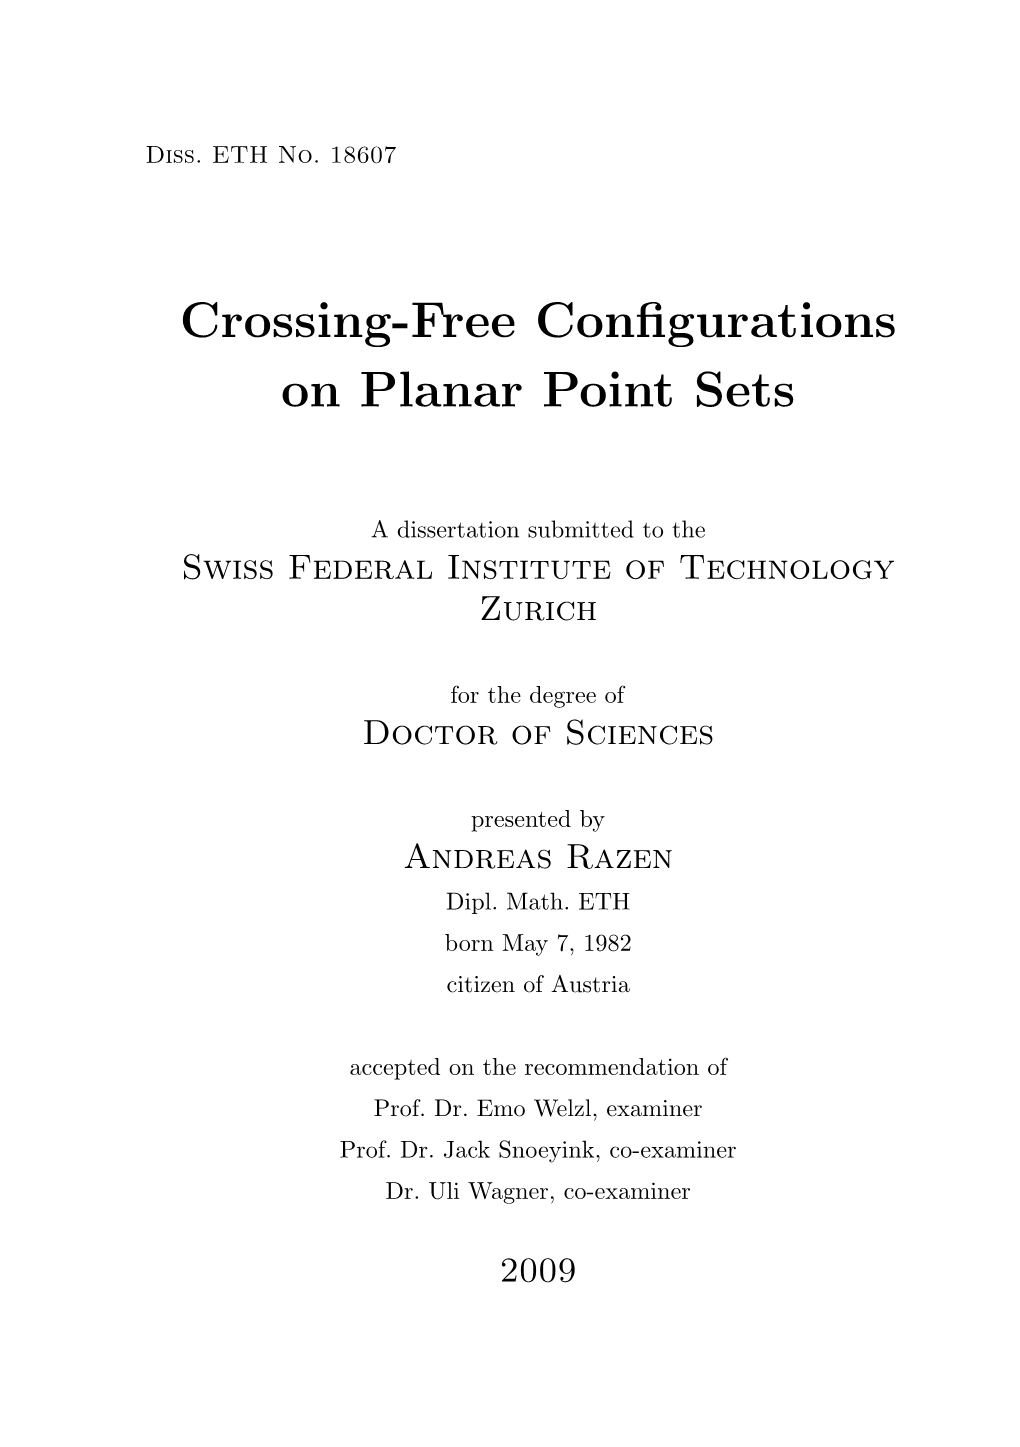 Crossing-Free Configurations on Planar Point Sets